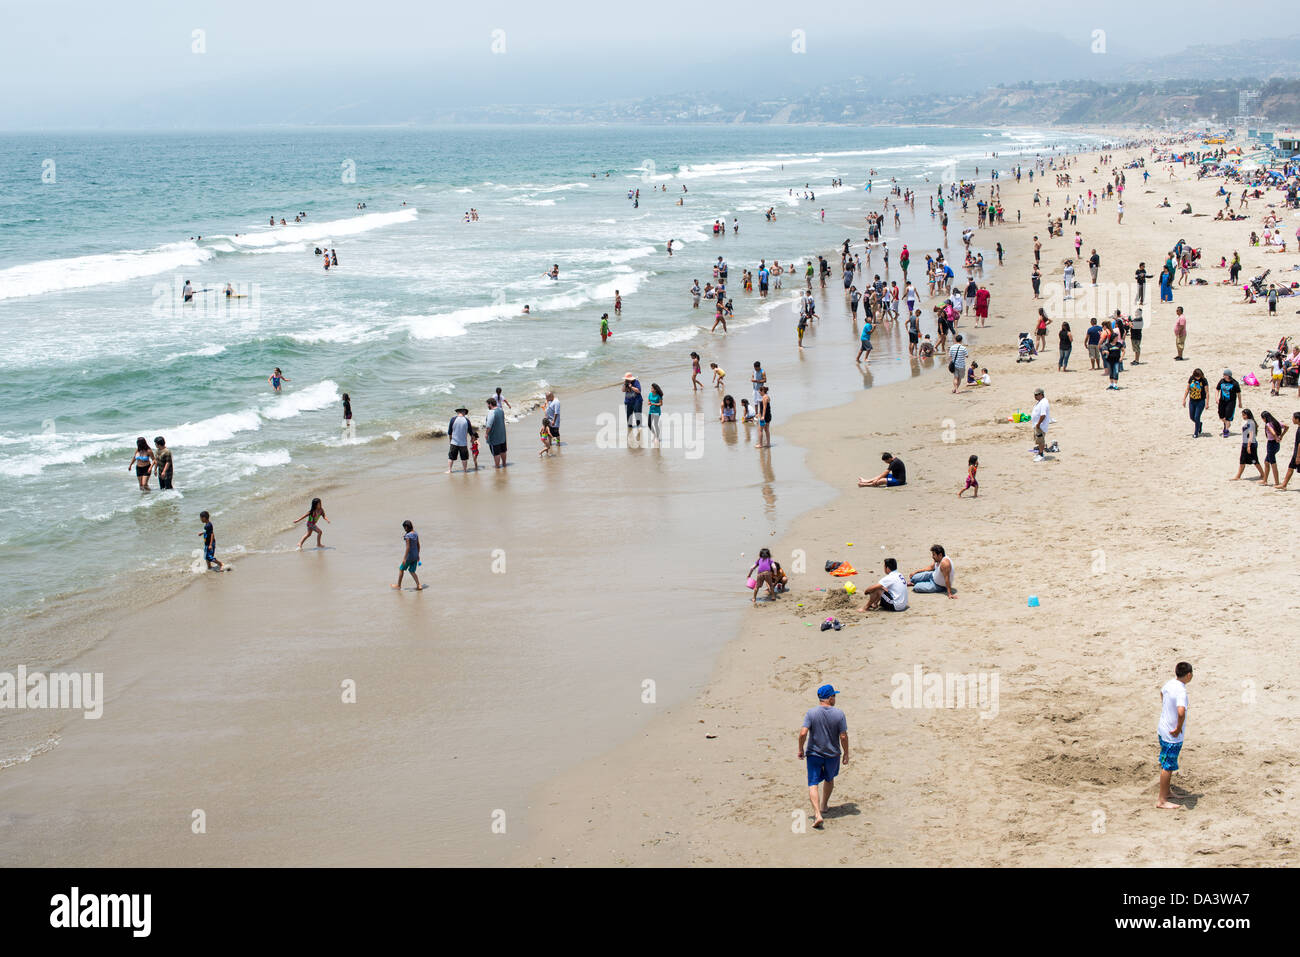 People enjoy the warm summer weather at Santa Monica beach in west Los Angeles, California. Stock Photo